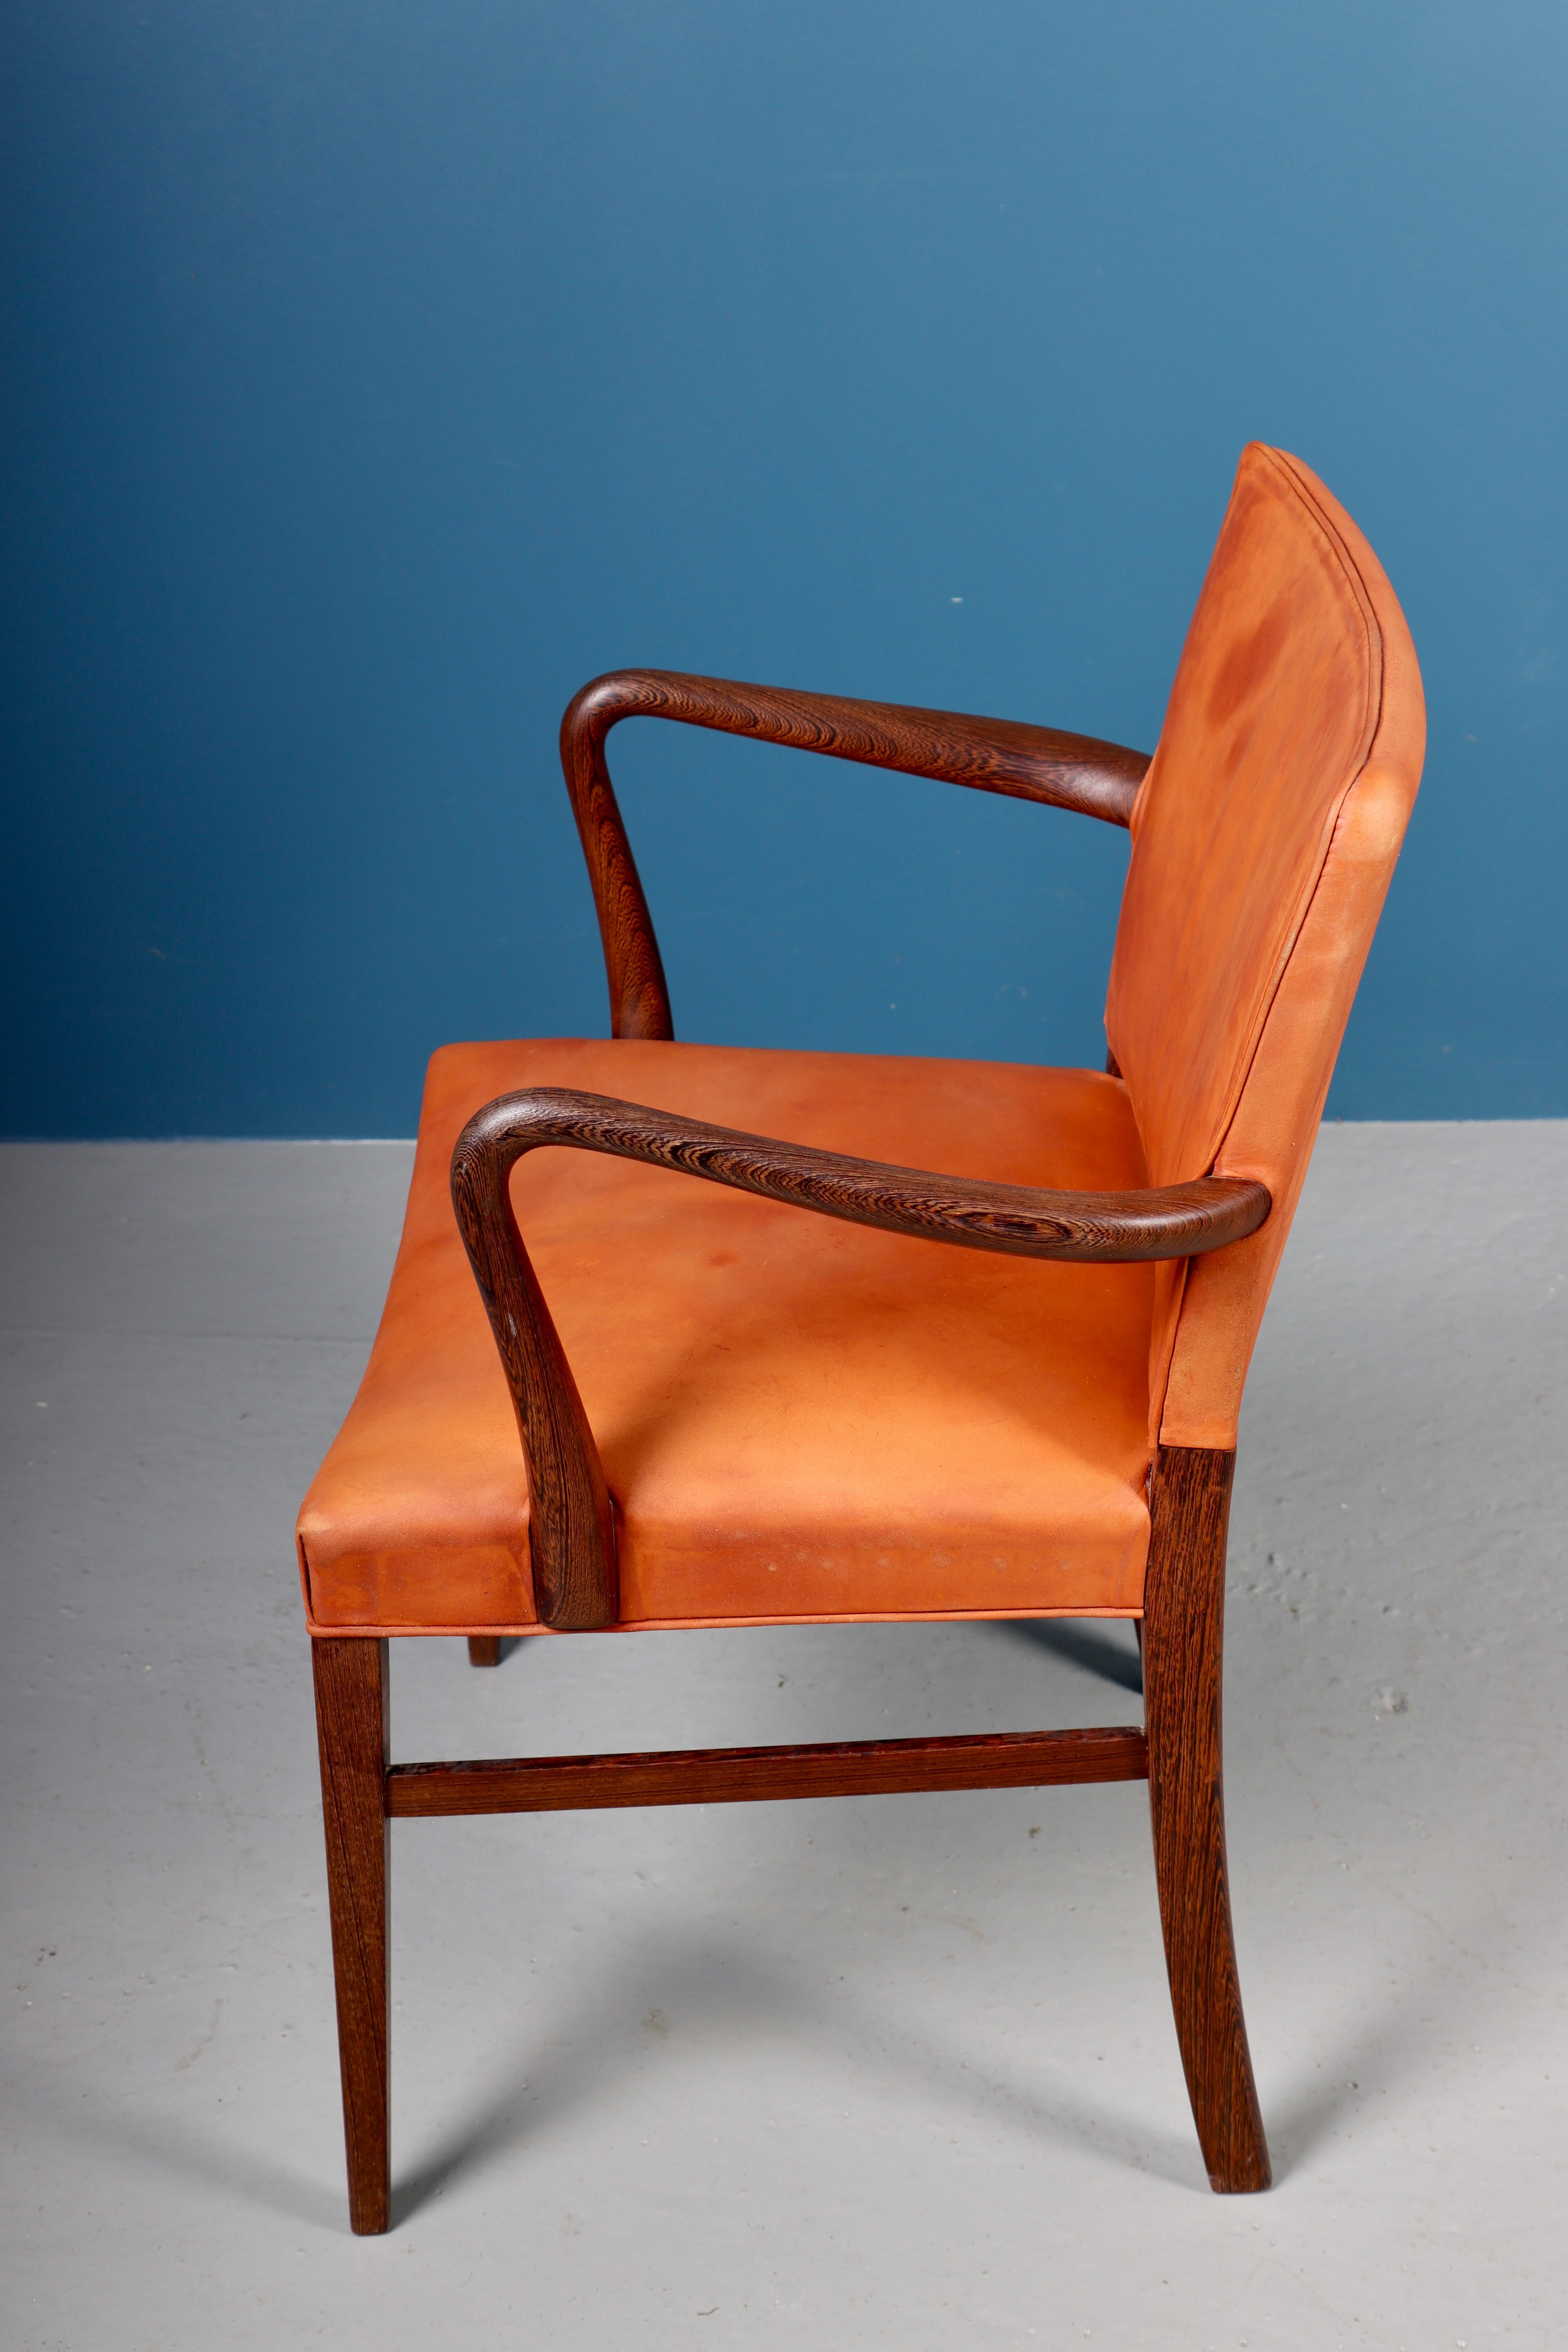 Scandinavian Rare Midcentury Armchair in Patinated Leather and Wenge, Danish Design, 1950s For Sale